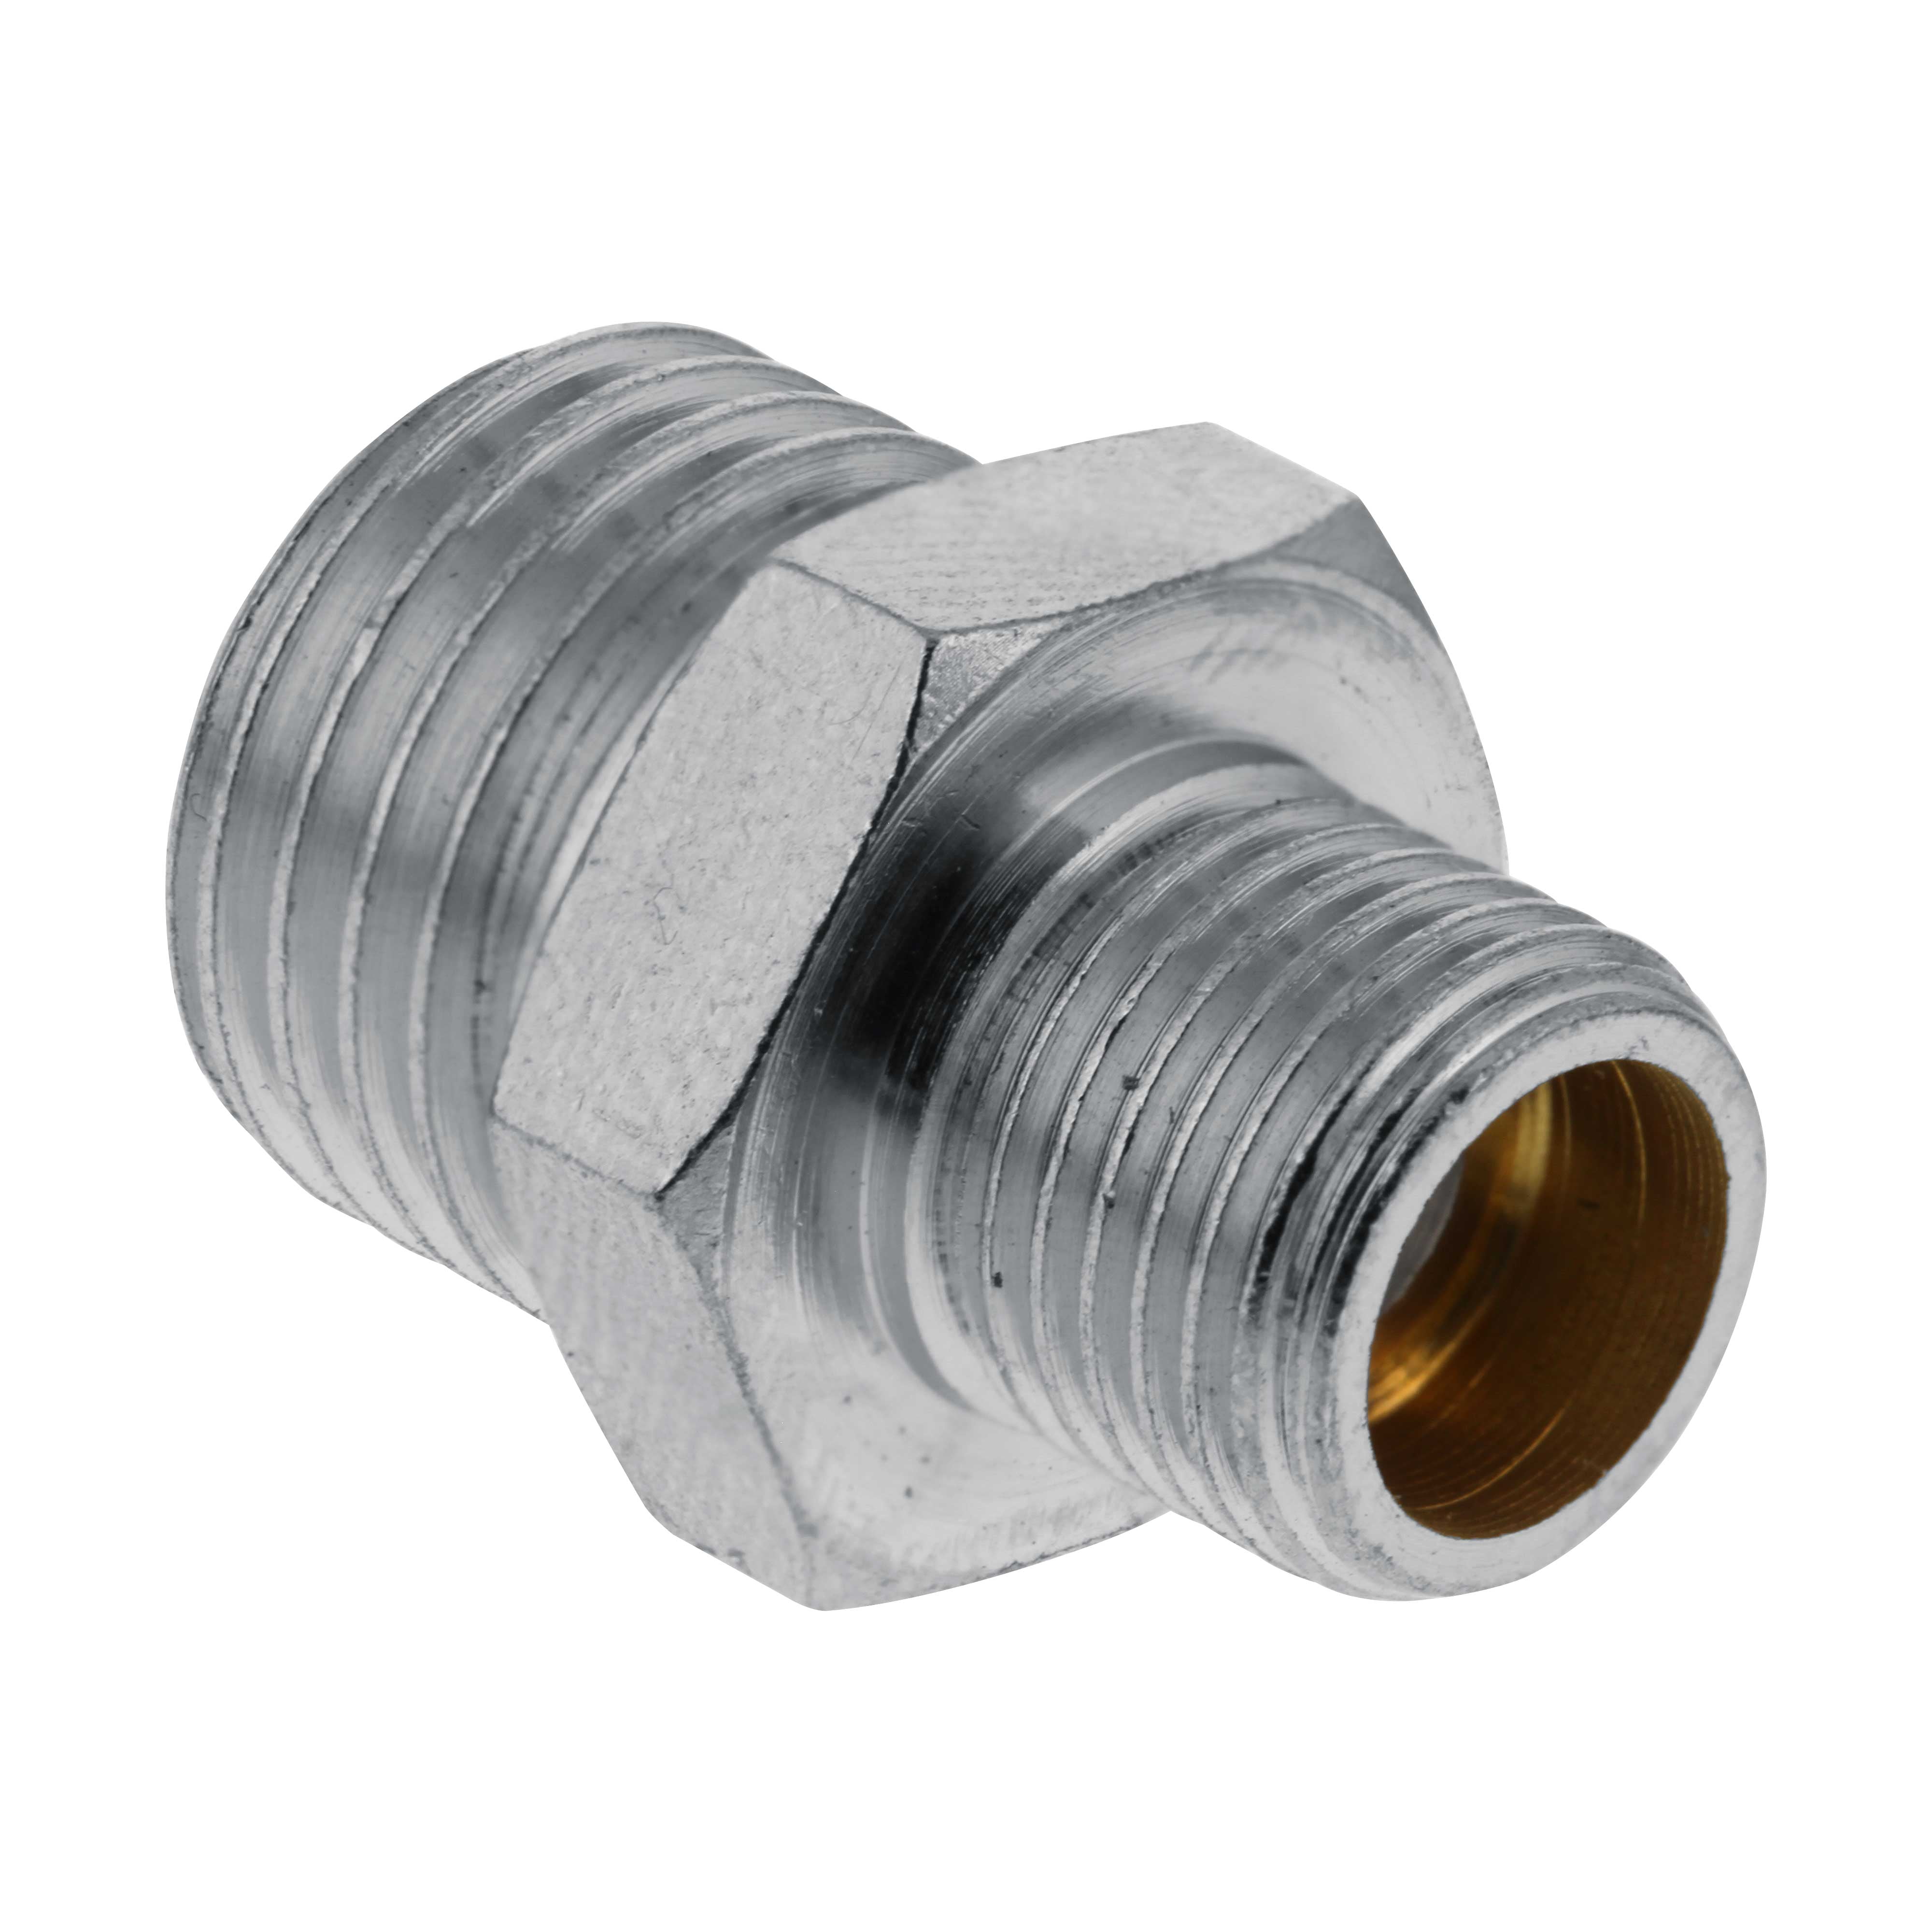 Airbrush Air Hose 1/8 BSP Male to 1/4 BSP Male Fitting Connector Adapter